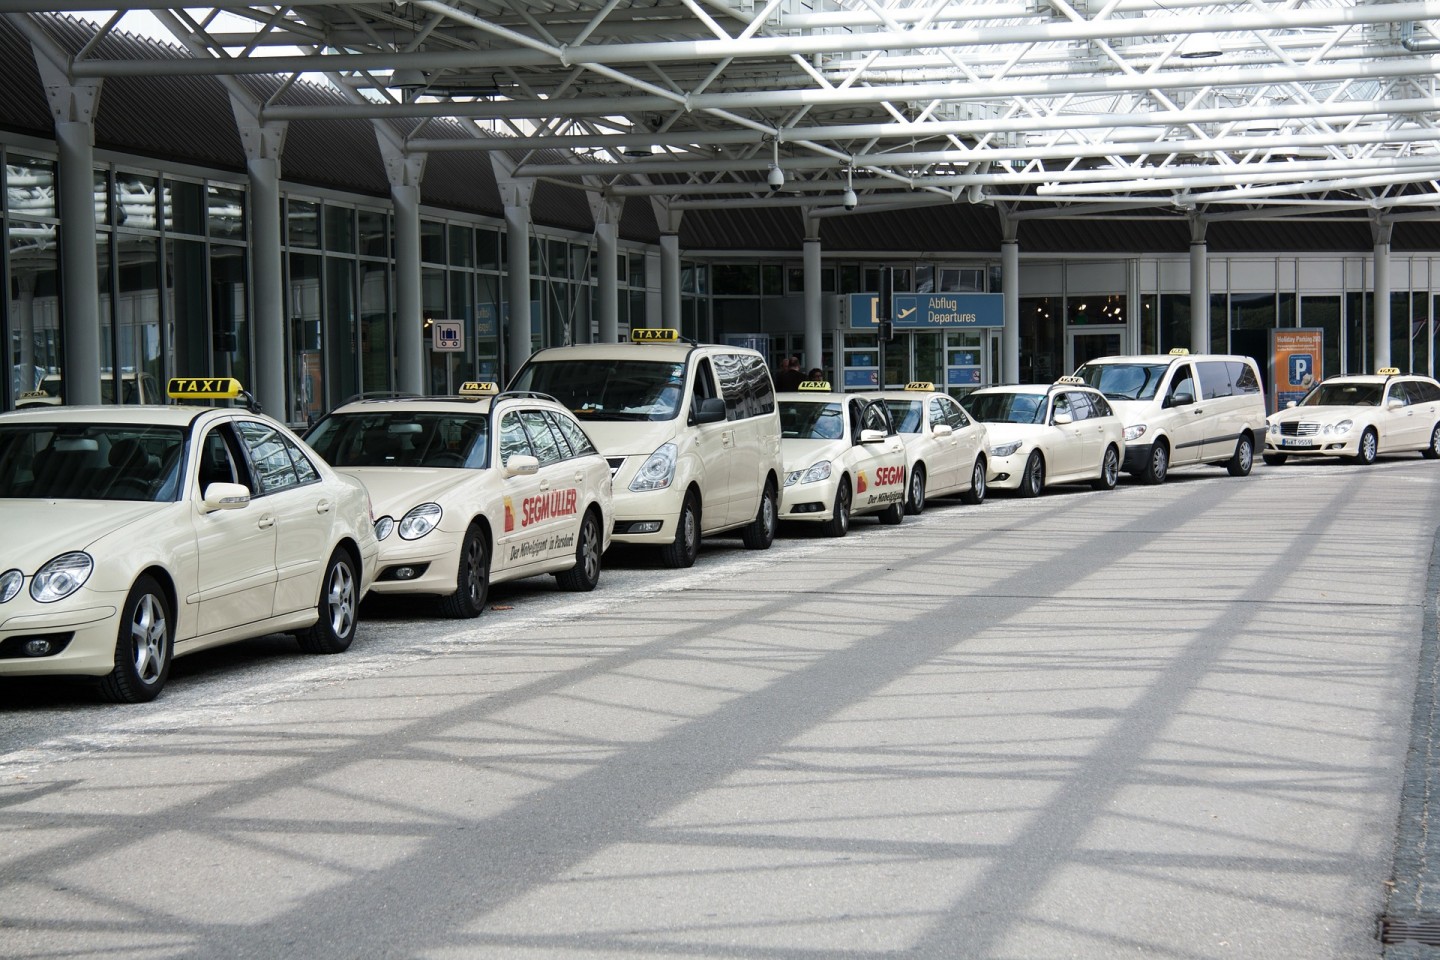 London airport taxi